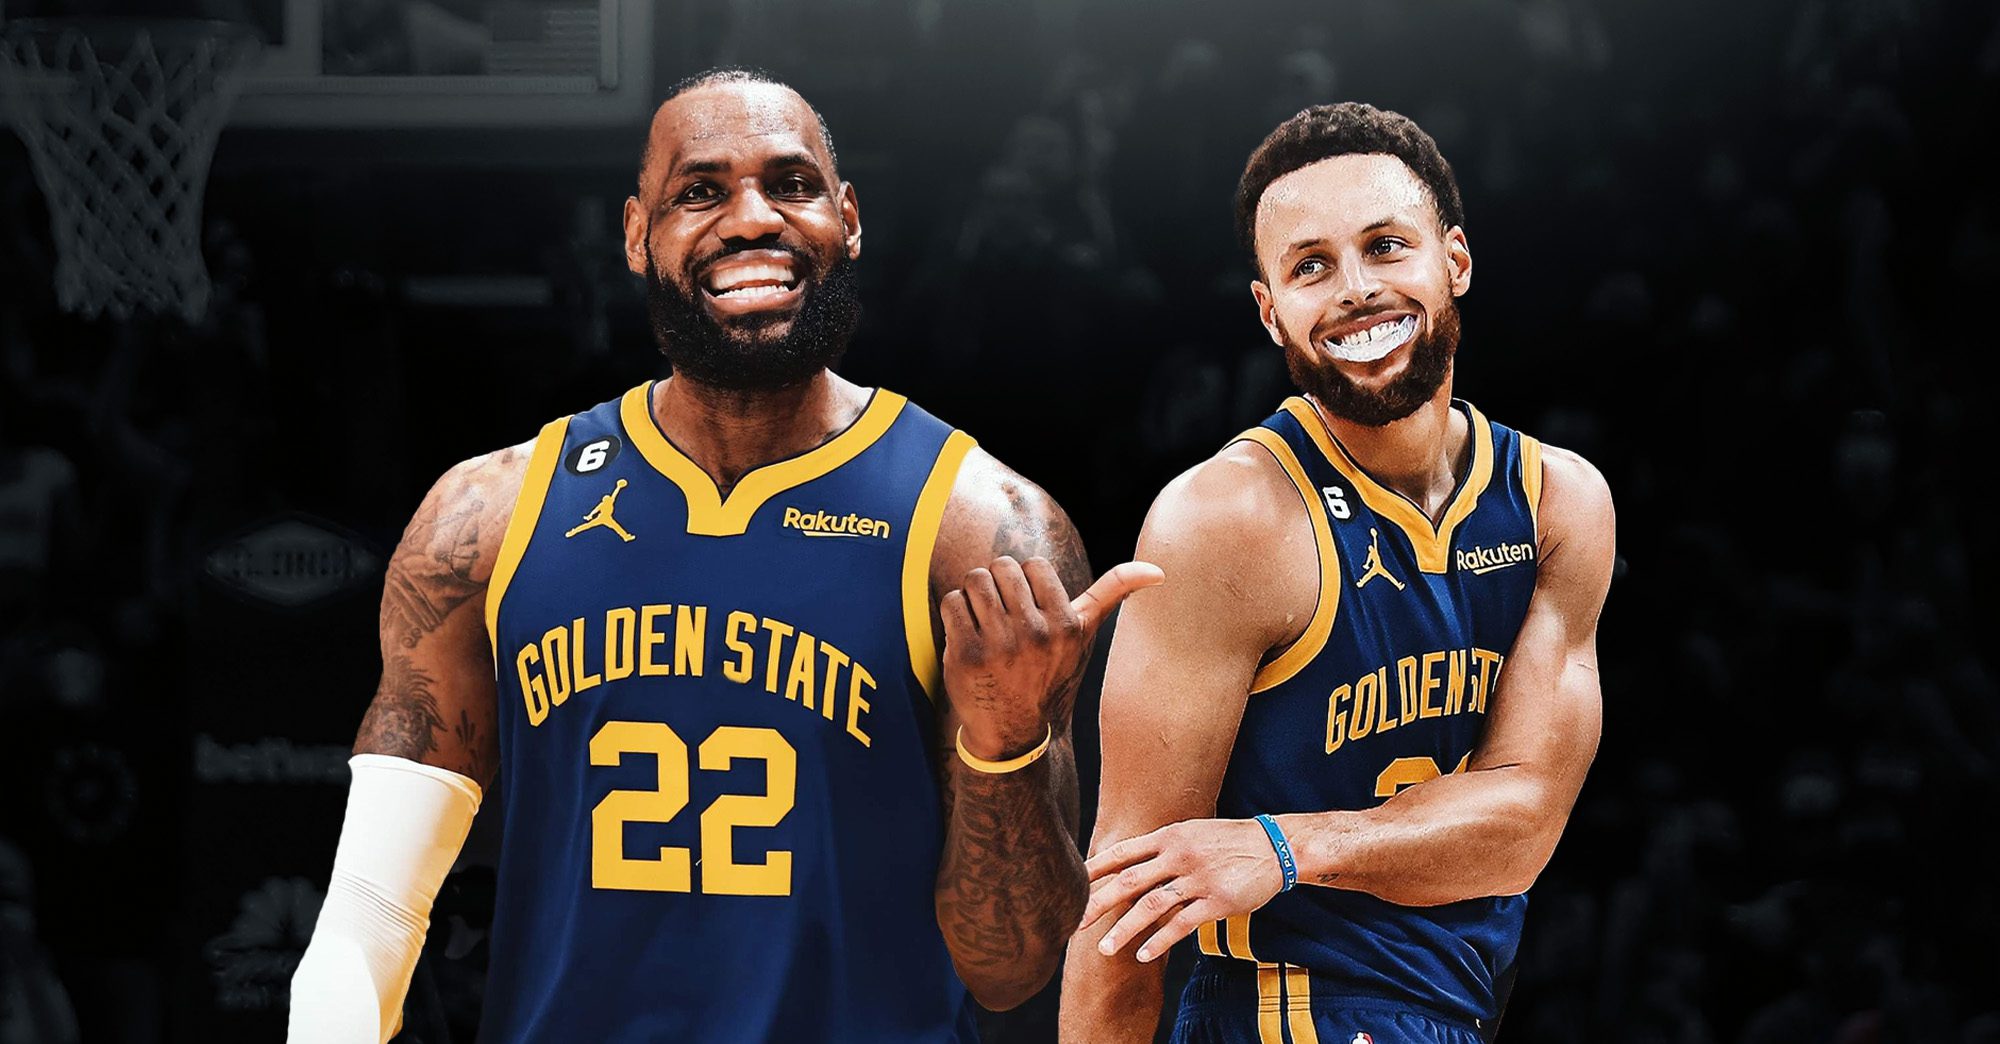 Will We Ever See LeBron James and Steph Curry on the Same Team?